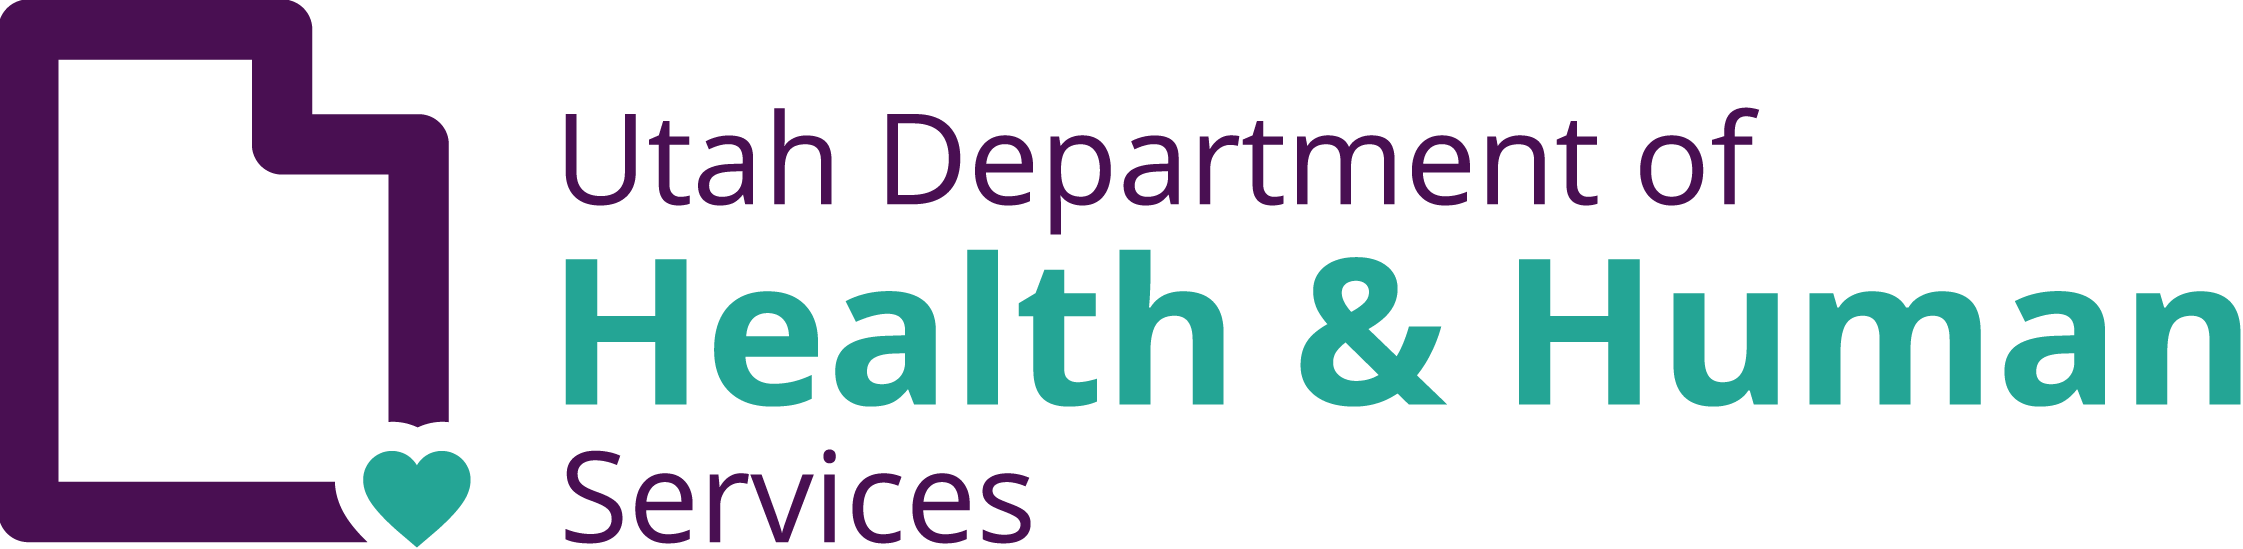 Utah Department of Health and Human Services Logo